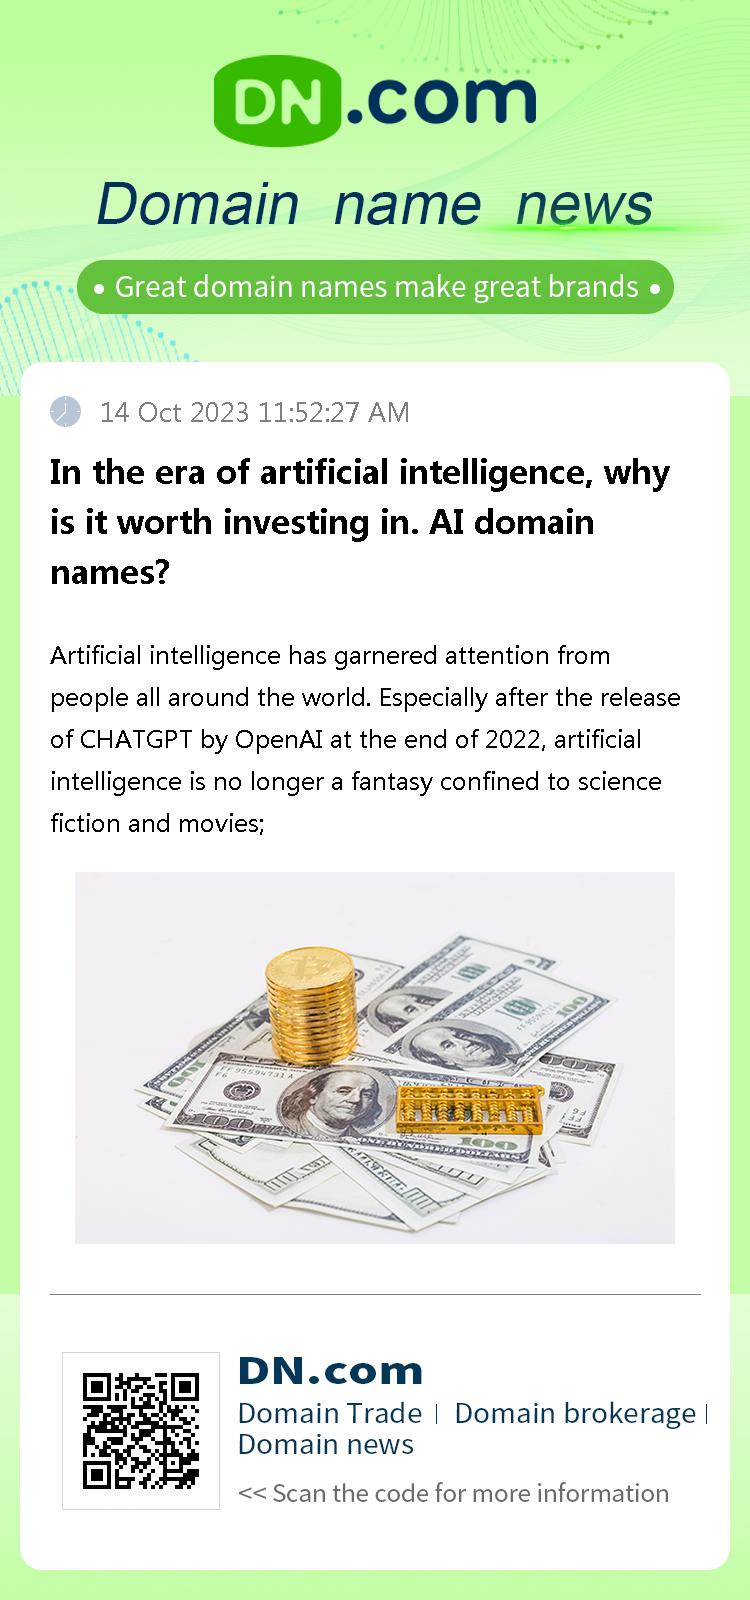 In the era of artificial intelligence, why is it worth investing in. AI domain names?